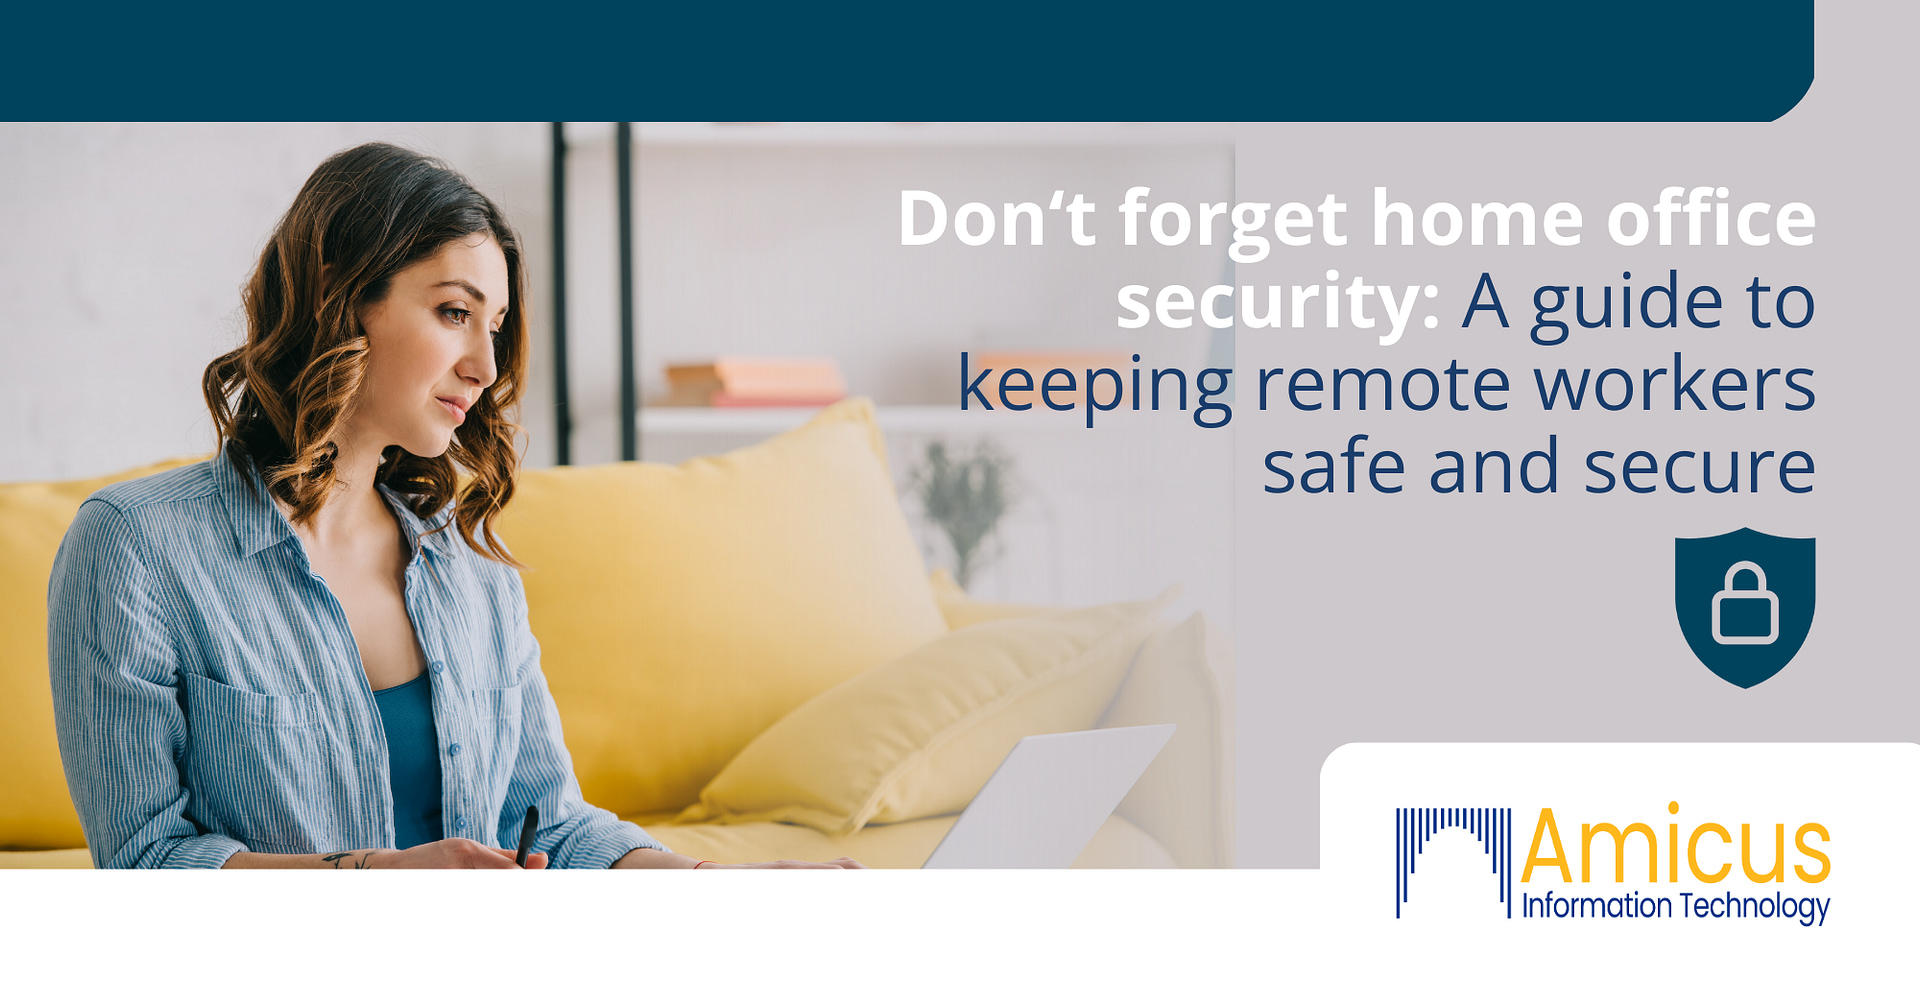 Guide to keeping remote workers safe and secure | Amicus IT | IT Support Services | Lawyers | Attorneys